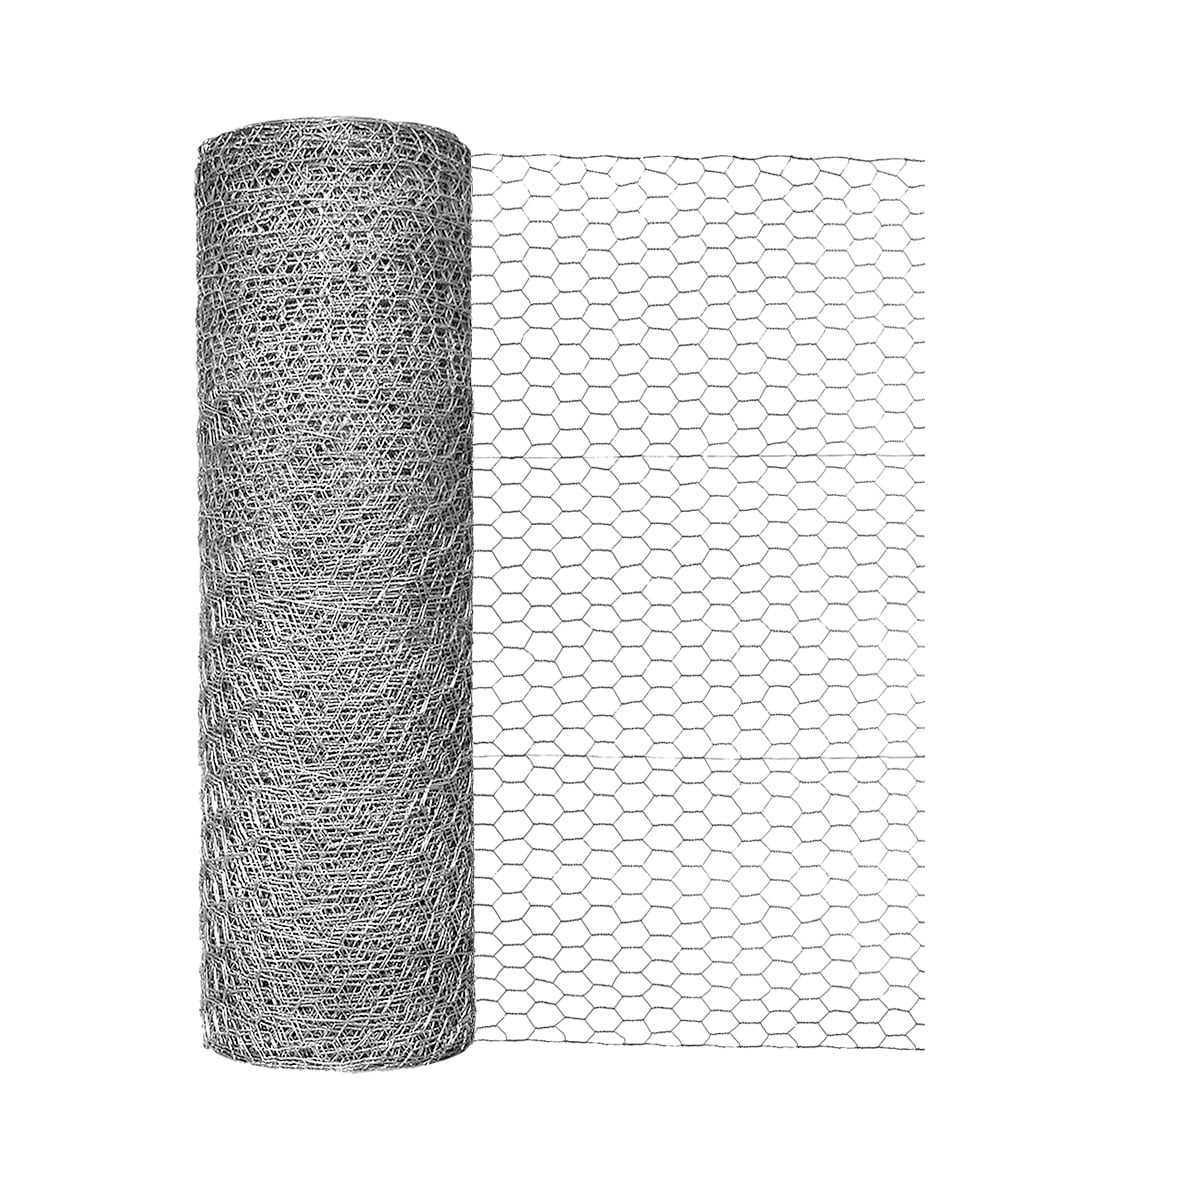 Metal Mesh Fencing Chicken Wire 1" Holes Many Sizes Galvanized Poultry Net 